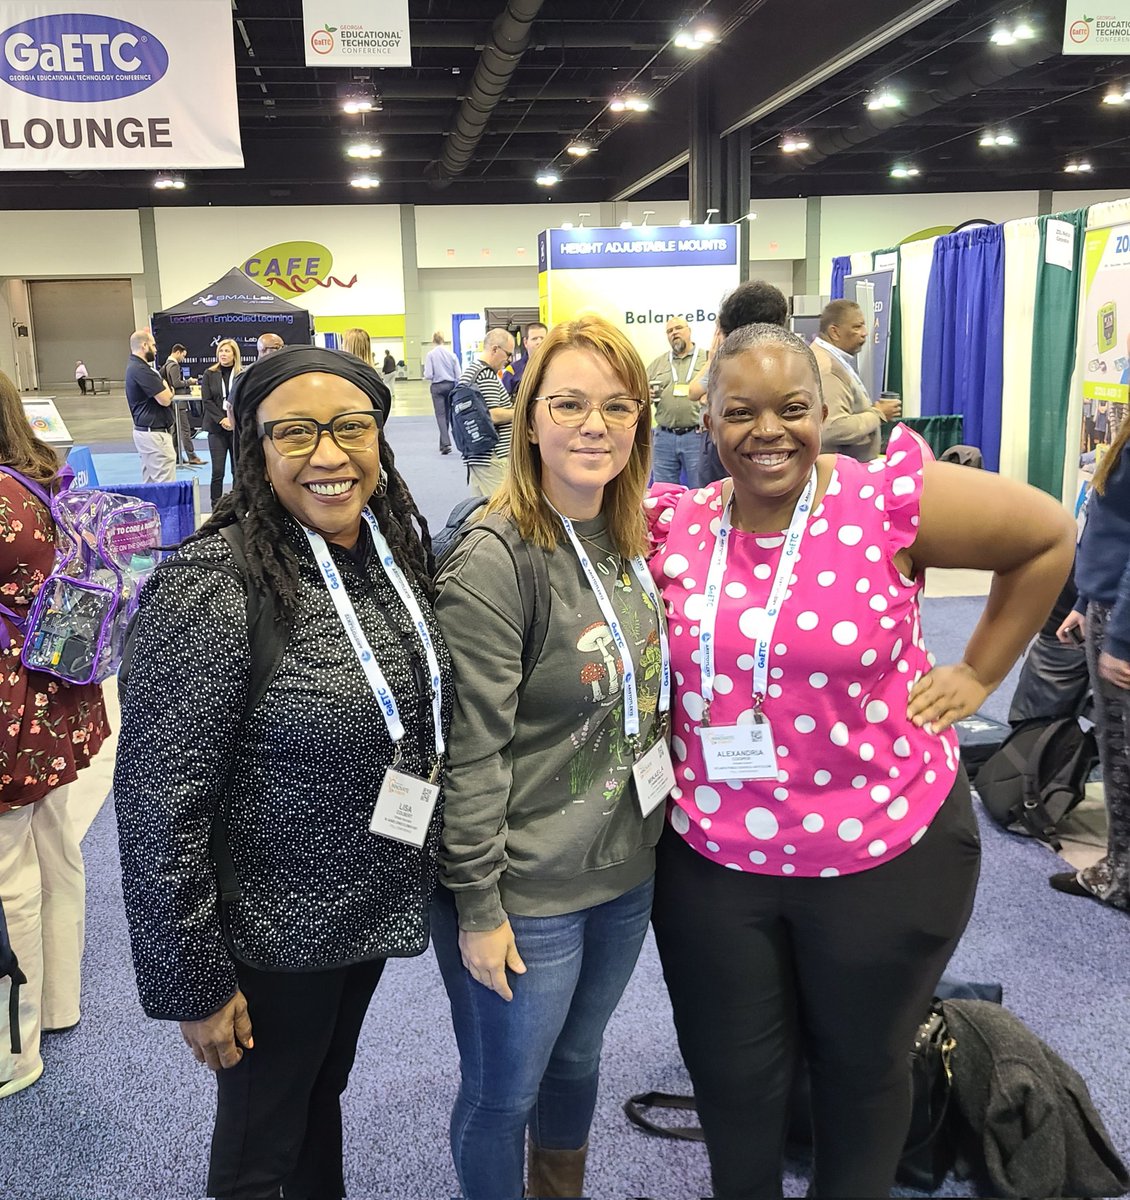 ❤️ running into my favorite educators @STEAMingCooper! @LisaColbert10 is famous! She introduced me to so many wonderful people that I look forward to collaborating with #GaETC23 @rob_p_williams_